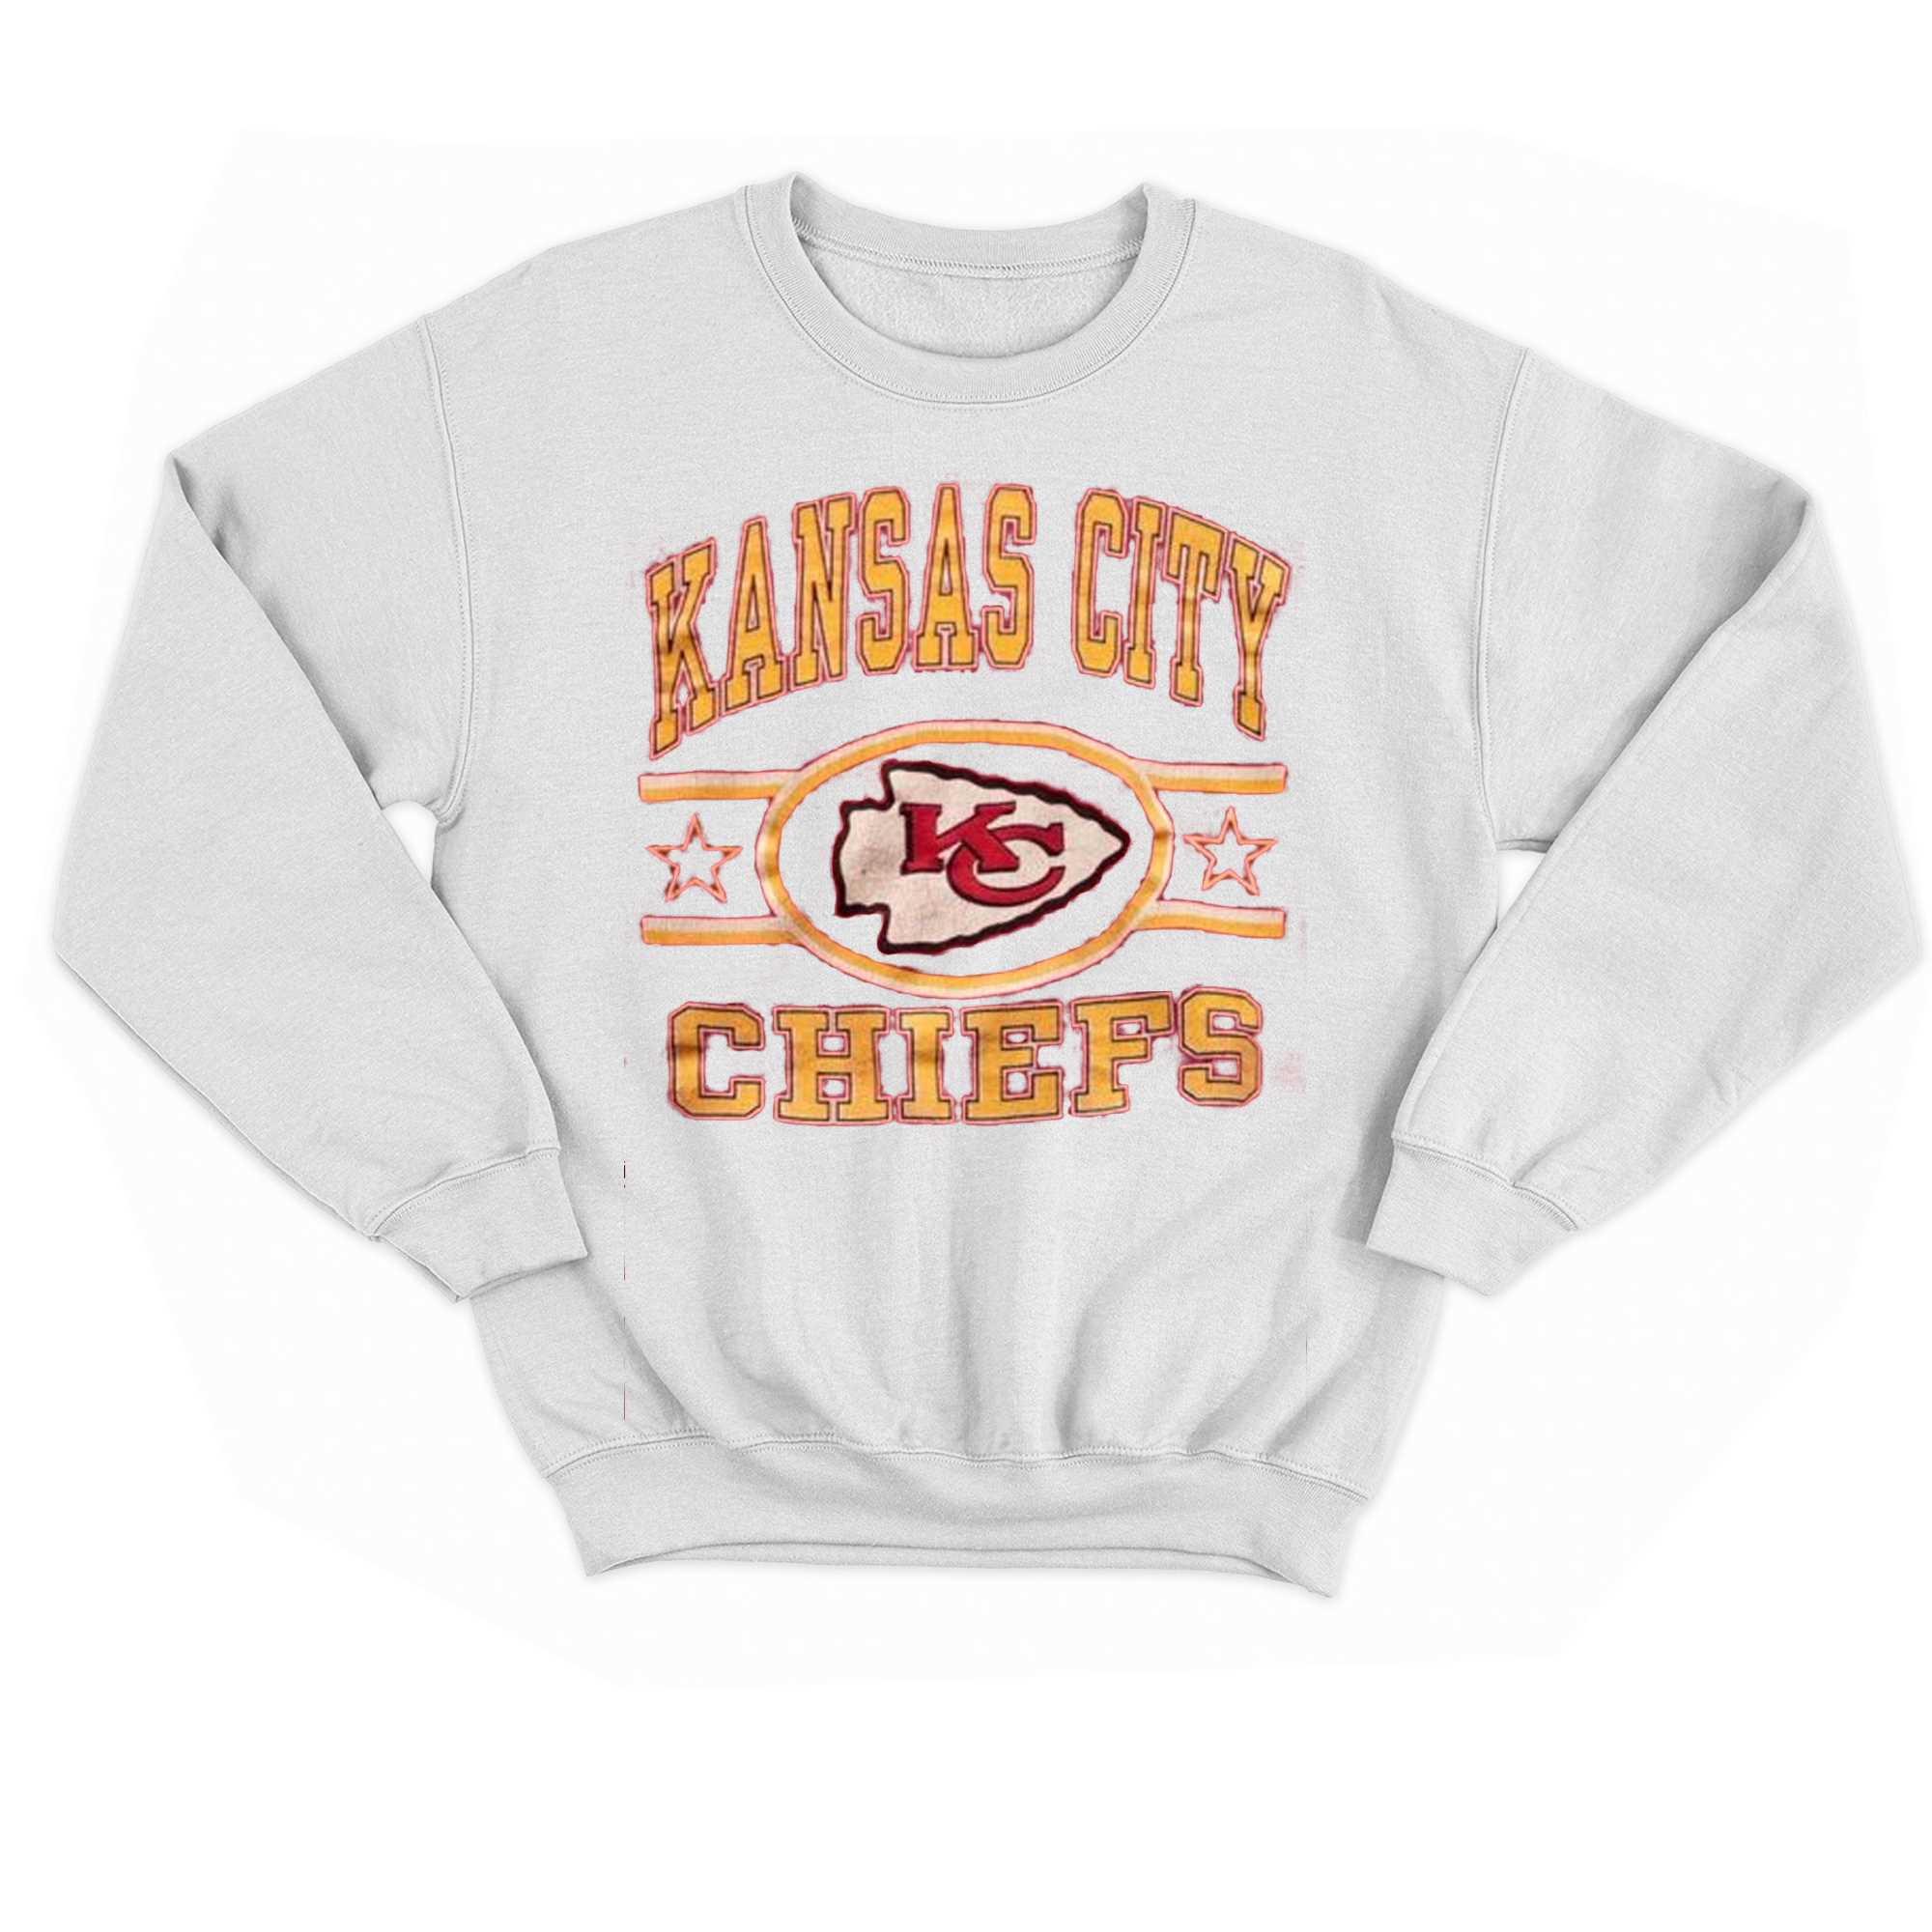 Official Vintage Style Kansas City Chiefs Football T-shirt 